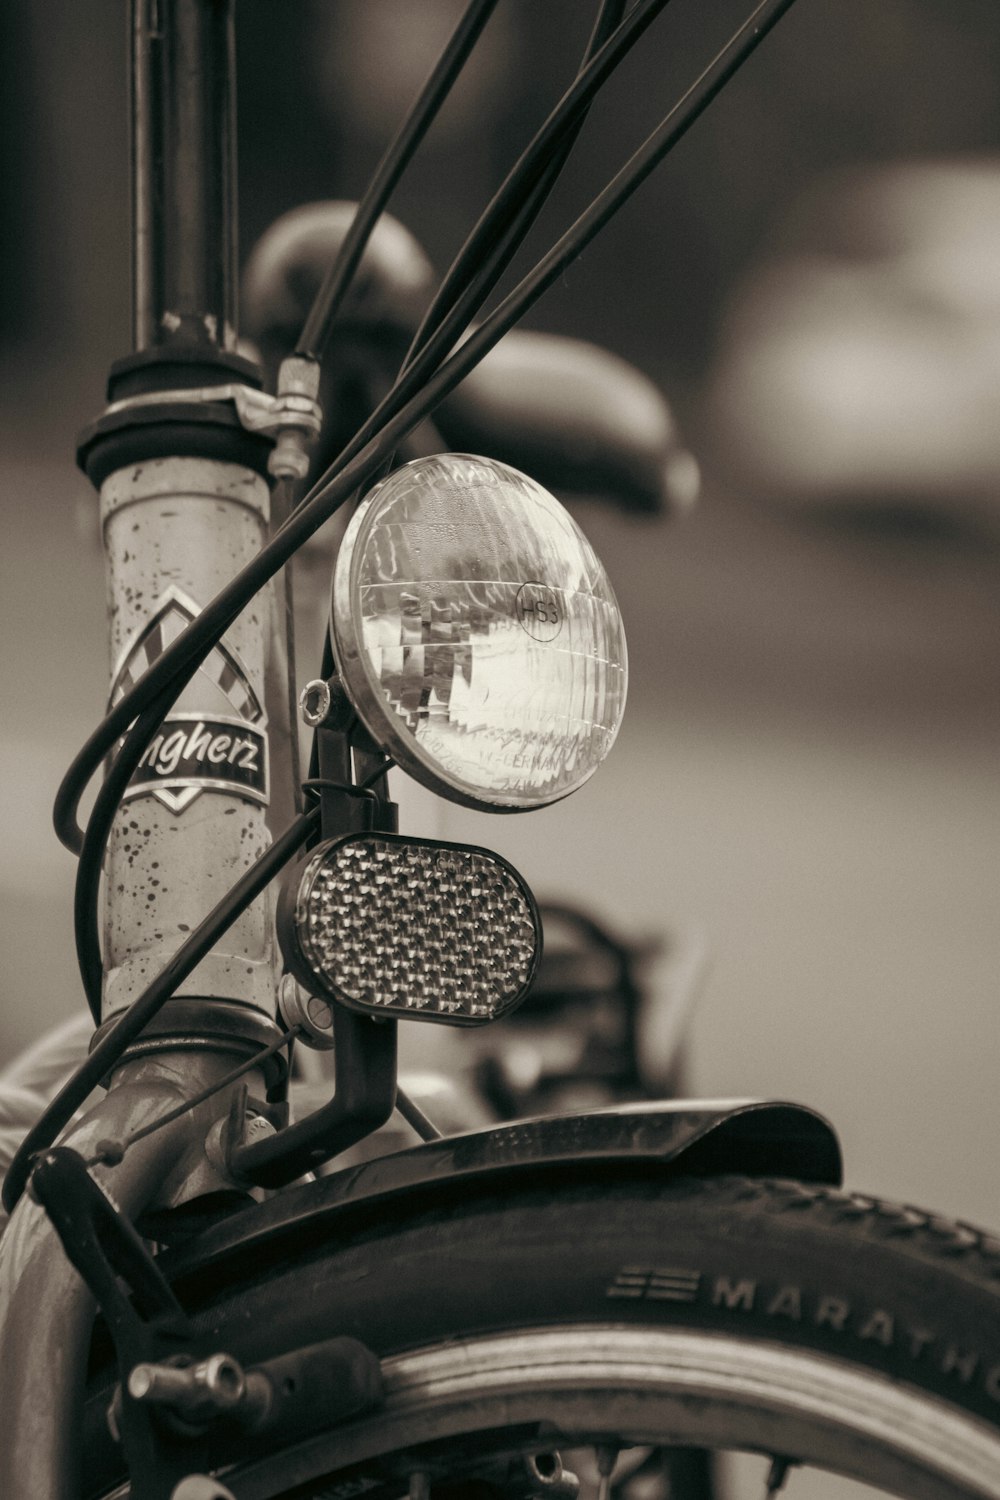 a close up of a bike with a light on it